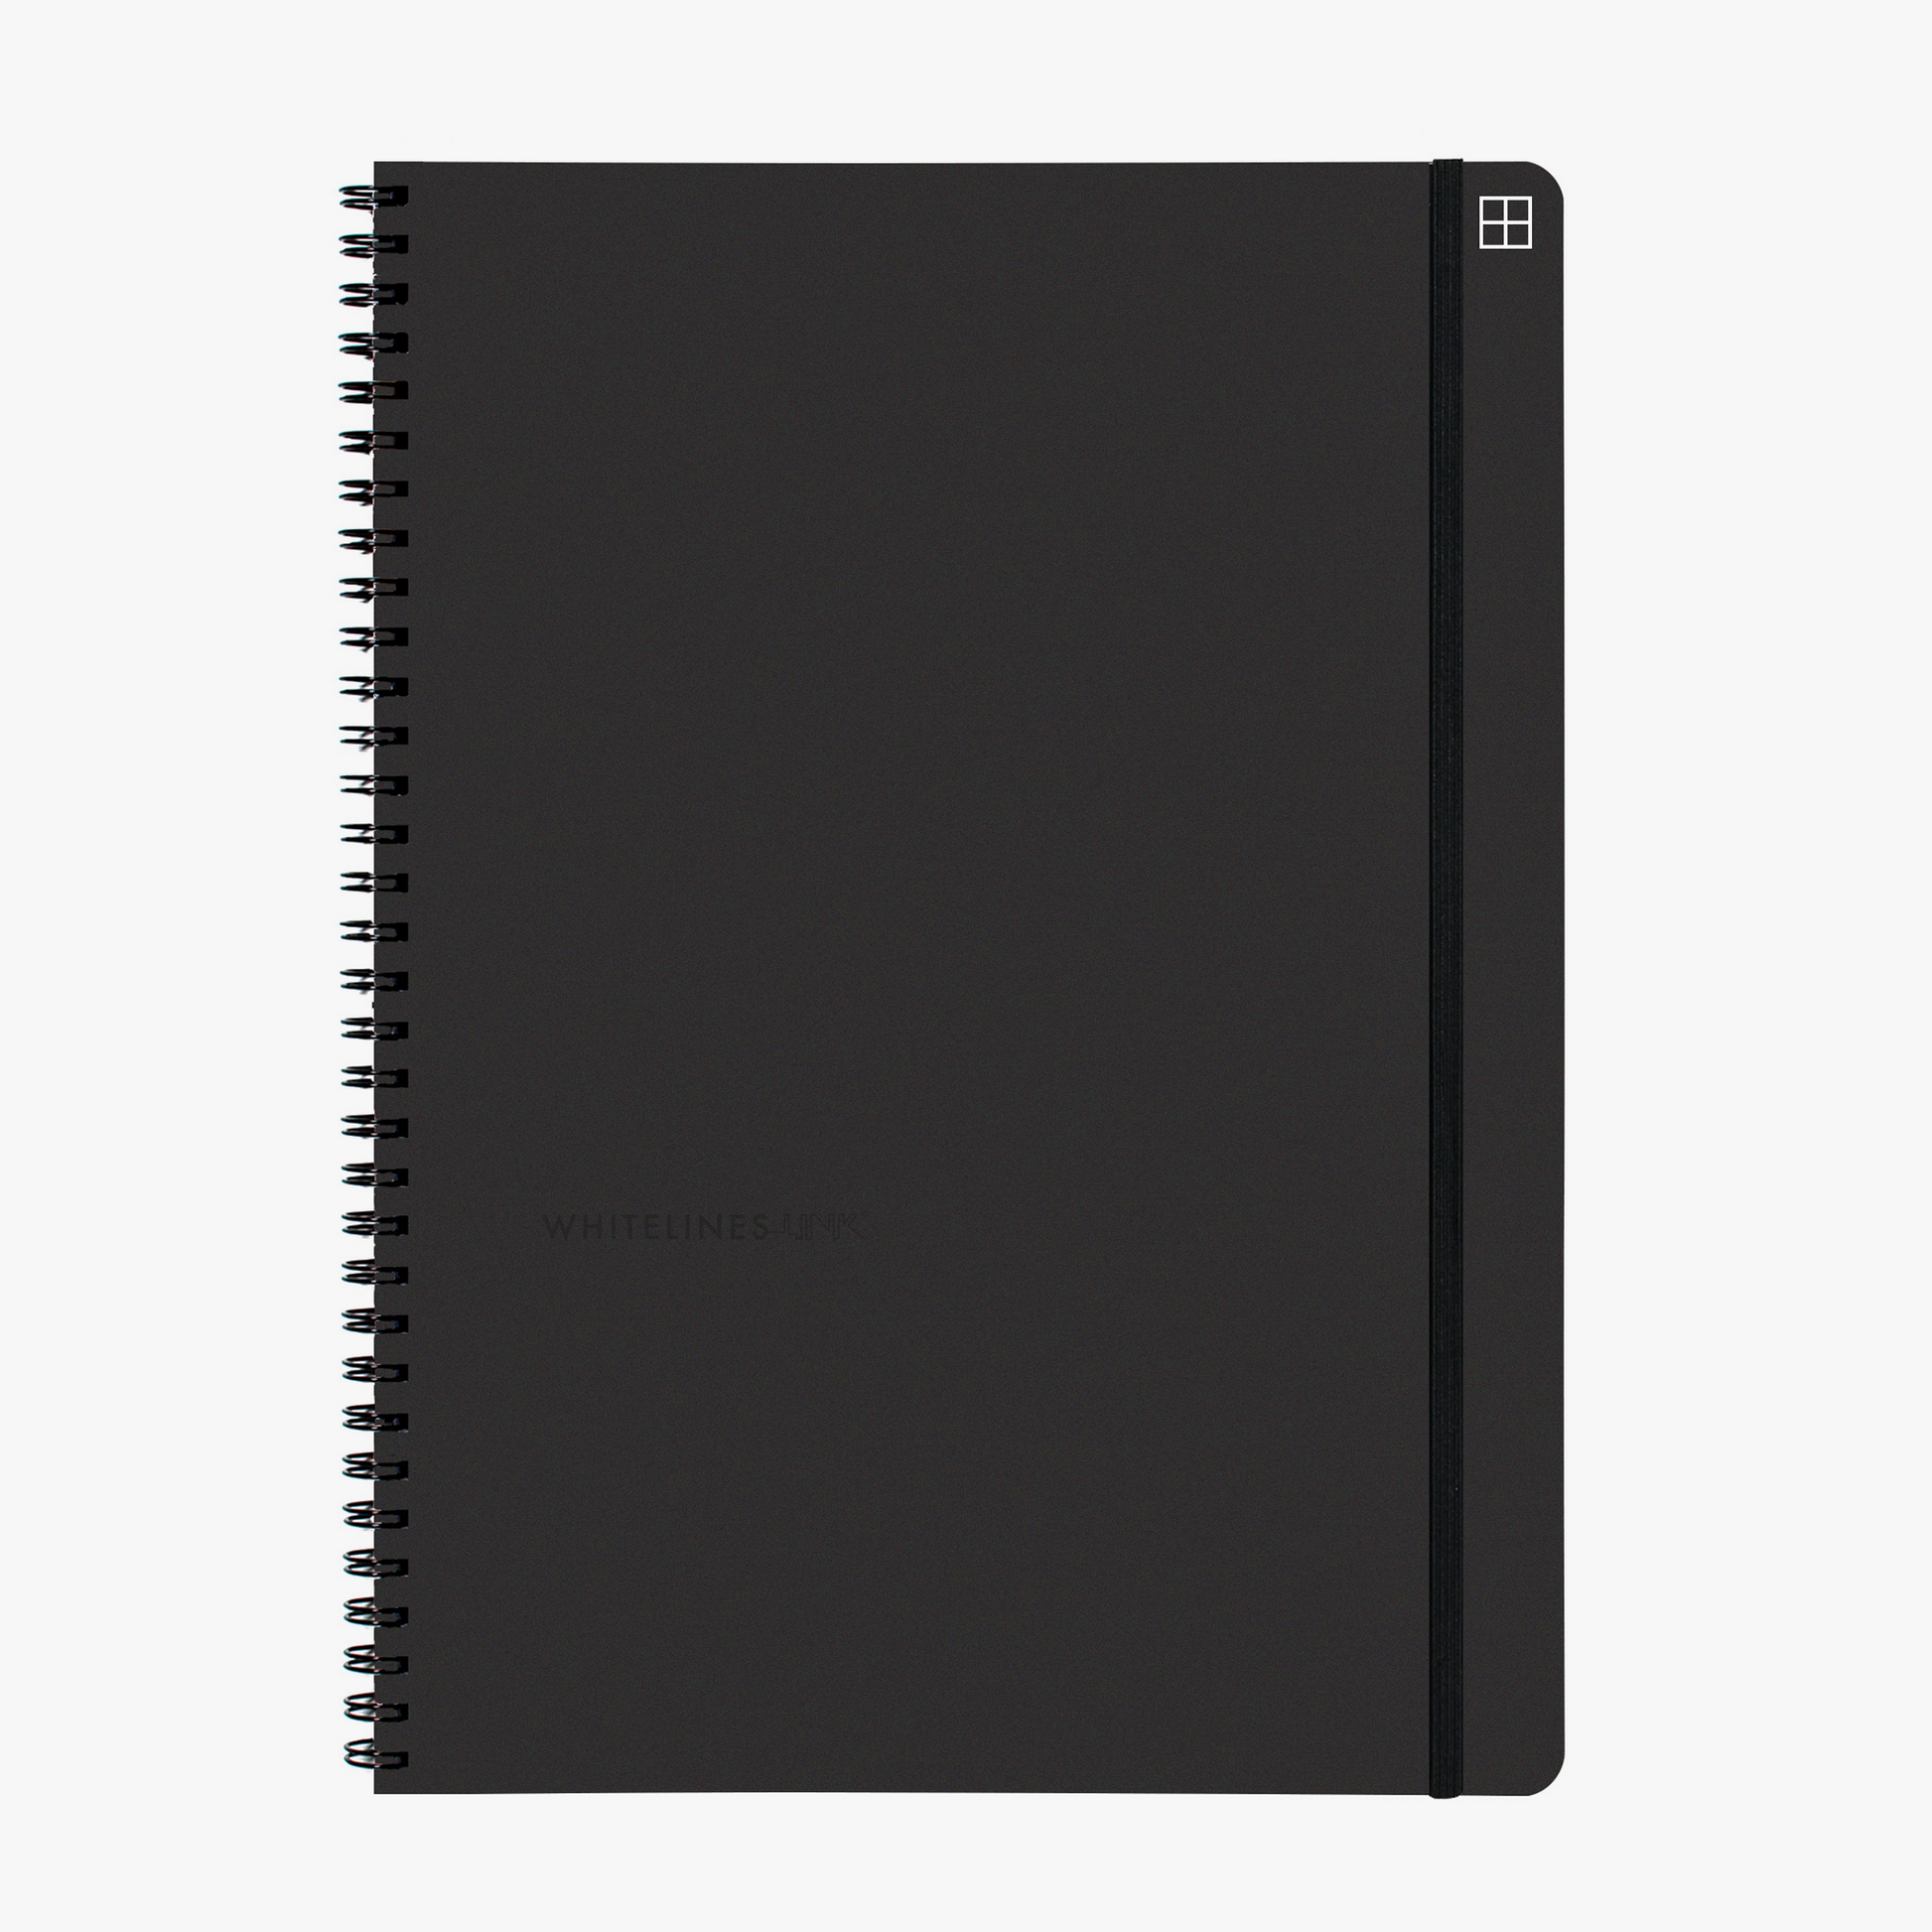 Black graph A4 notebook with white lines